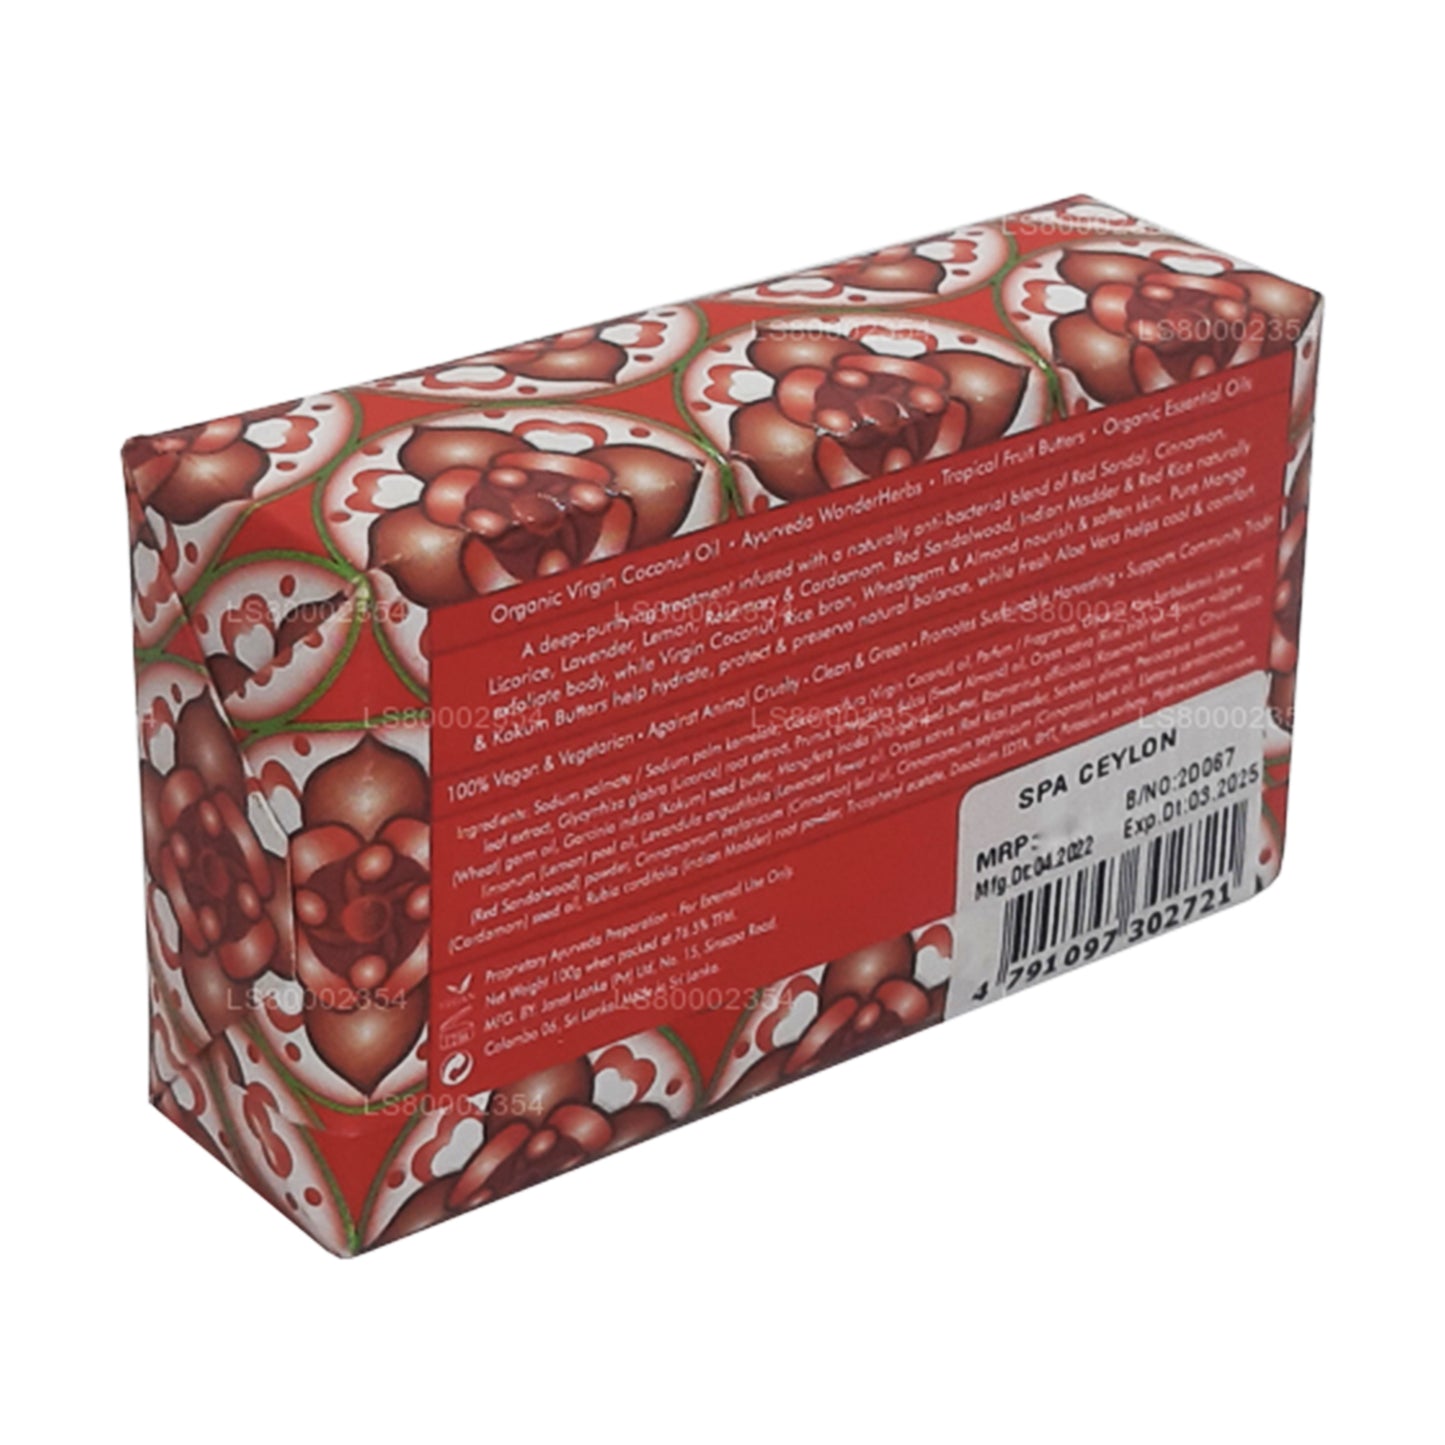 Spa Ceylon Red Sandal and Cinnamon Anti-bacterial Exfoliating Wellness Soap (100g)